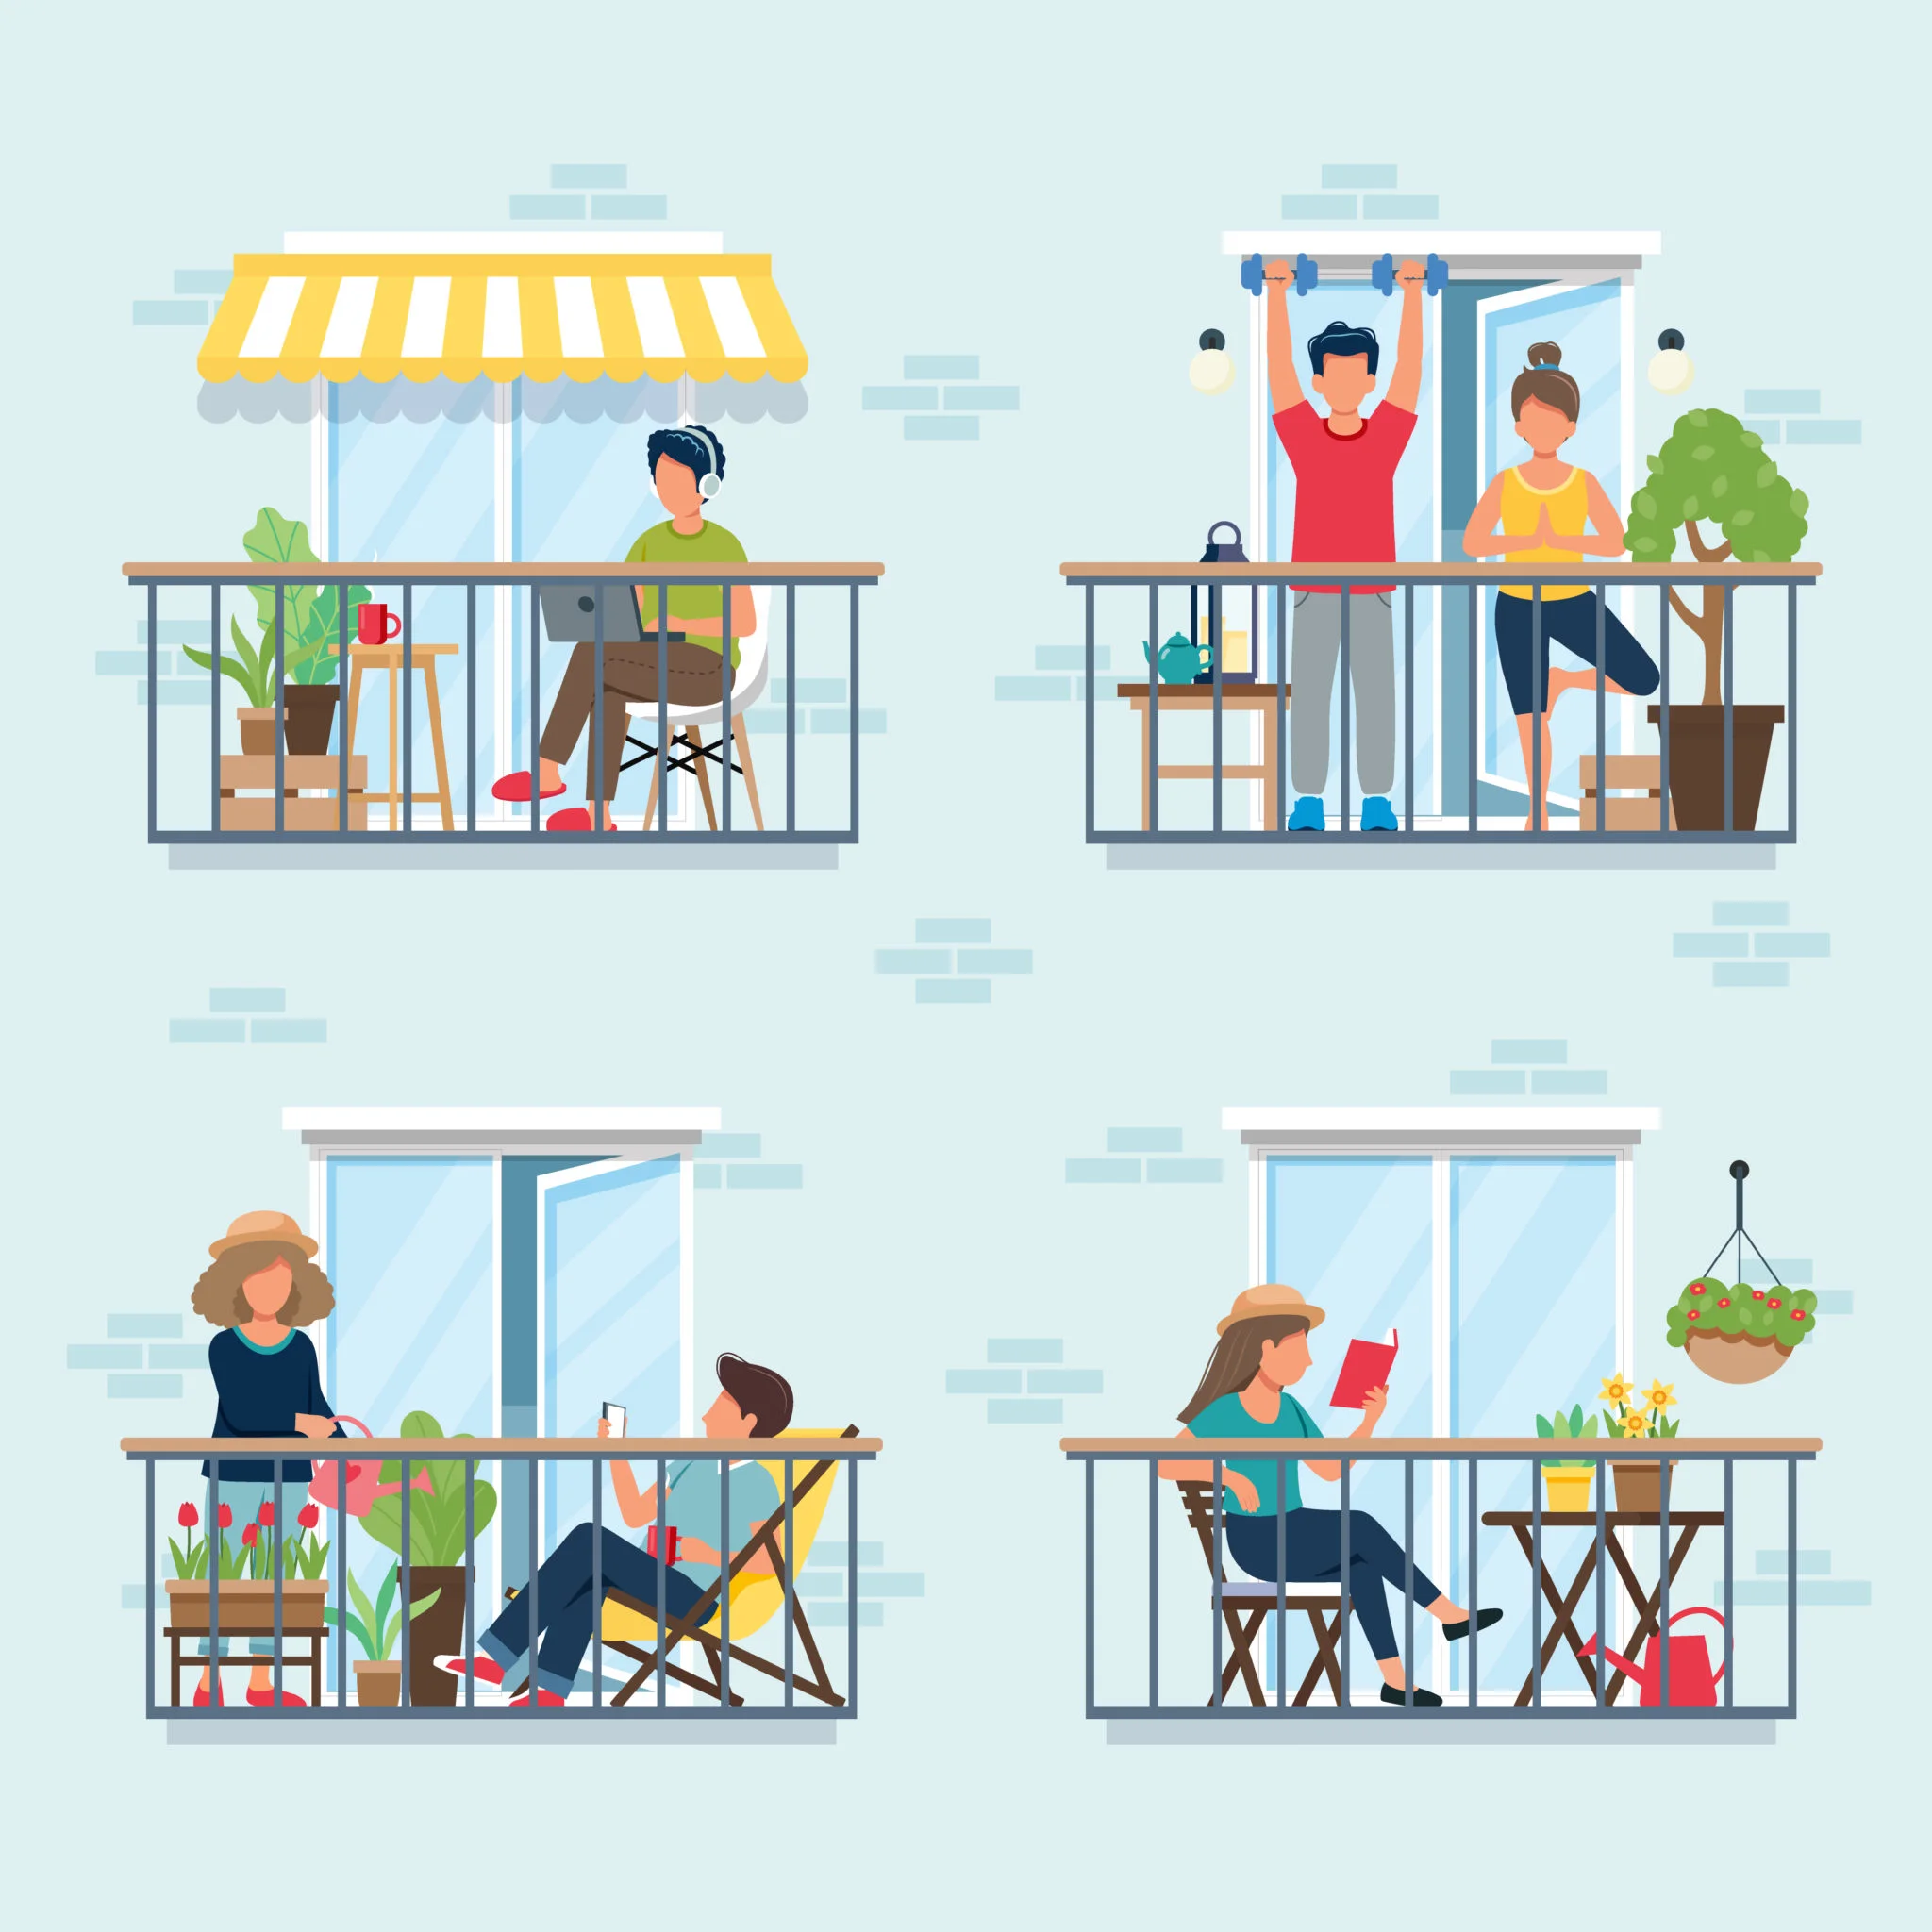 11 Ways How A Balcony Can Change Your Living Experience in a Post-Covid World